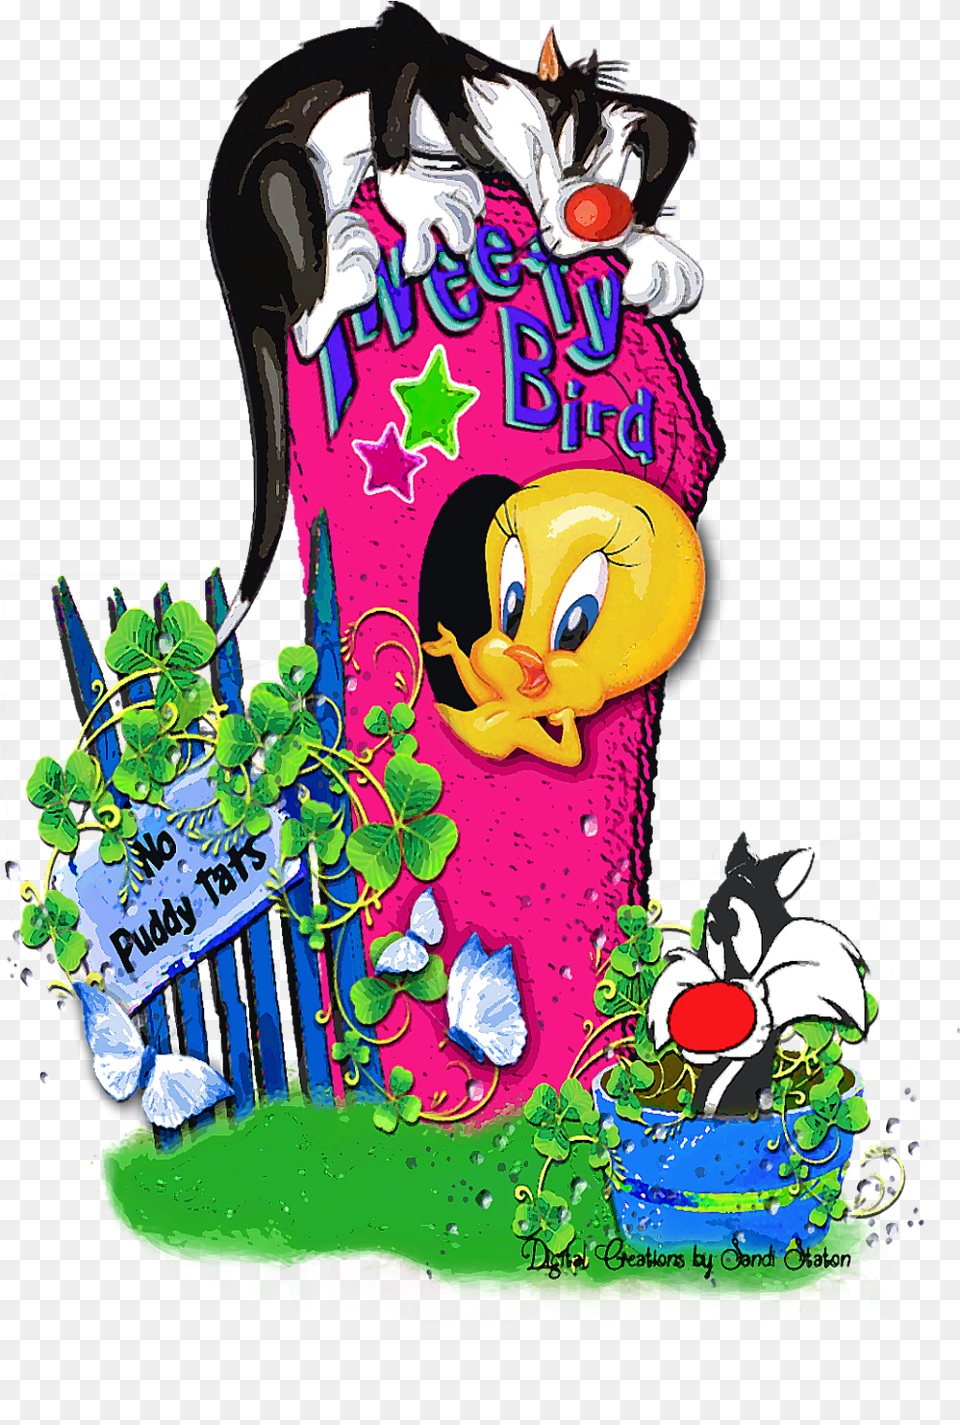 Sylvester The Cat Download Sylvester The Cat, Birthday Cake, Cake, Cream, Dessert Png